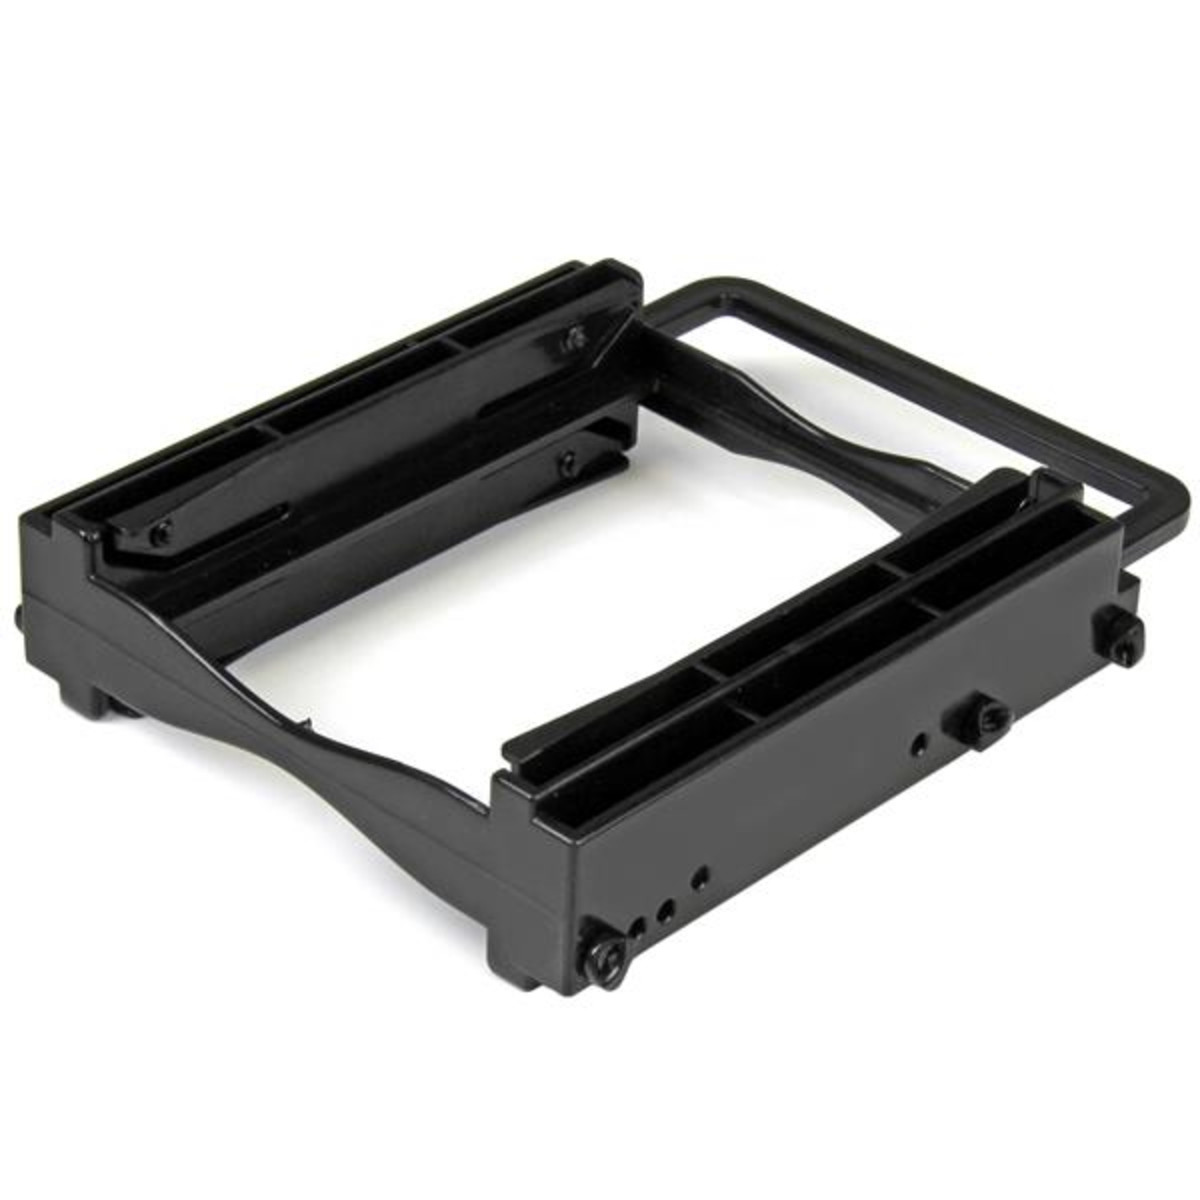 2.5 SSD/HDD Mount Bracket for 3.5 Bay